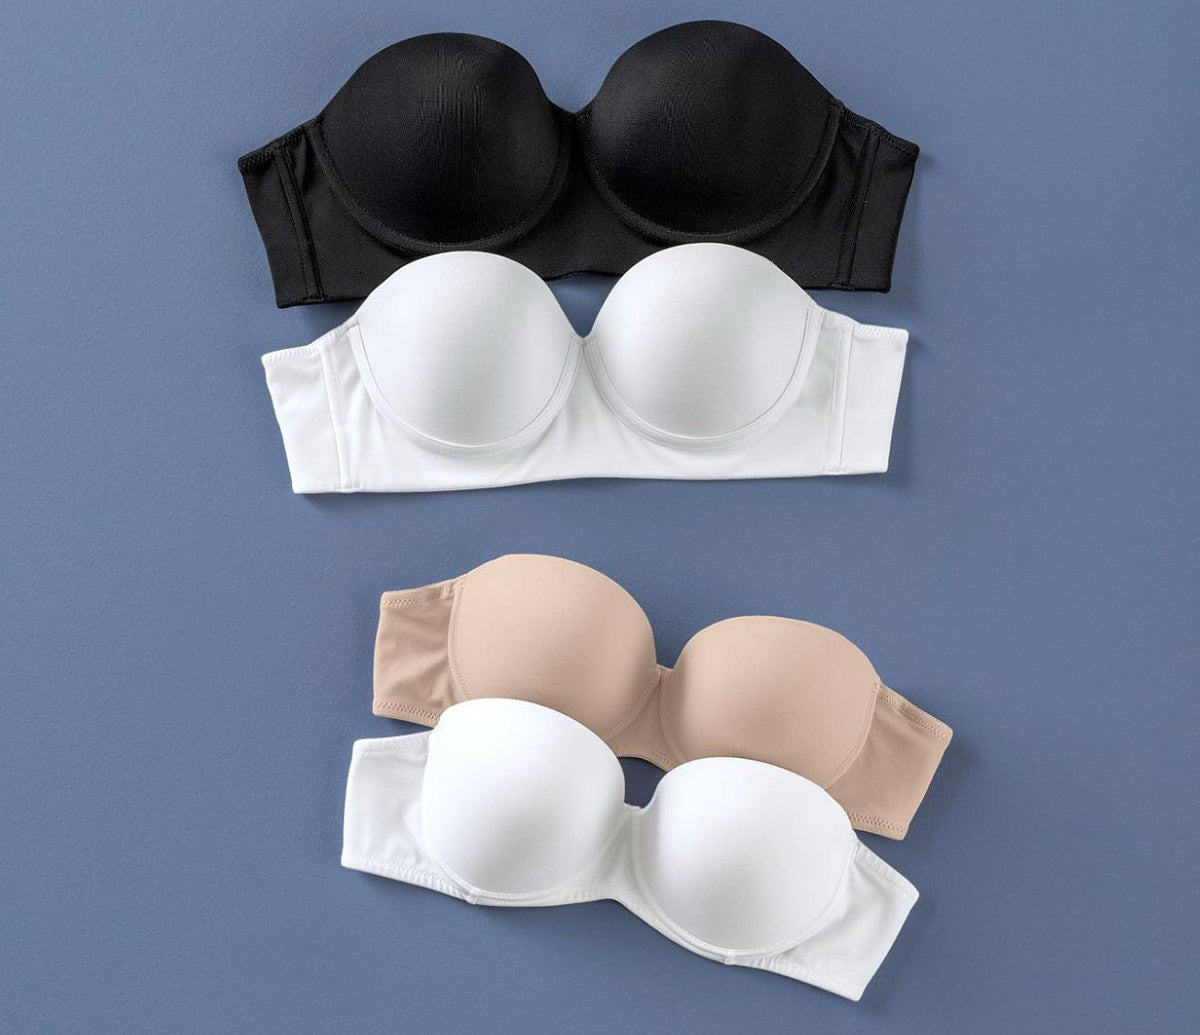 Straps Showing? Choosing the Right Bra for Your Halter Top - Miele